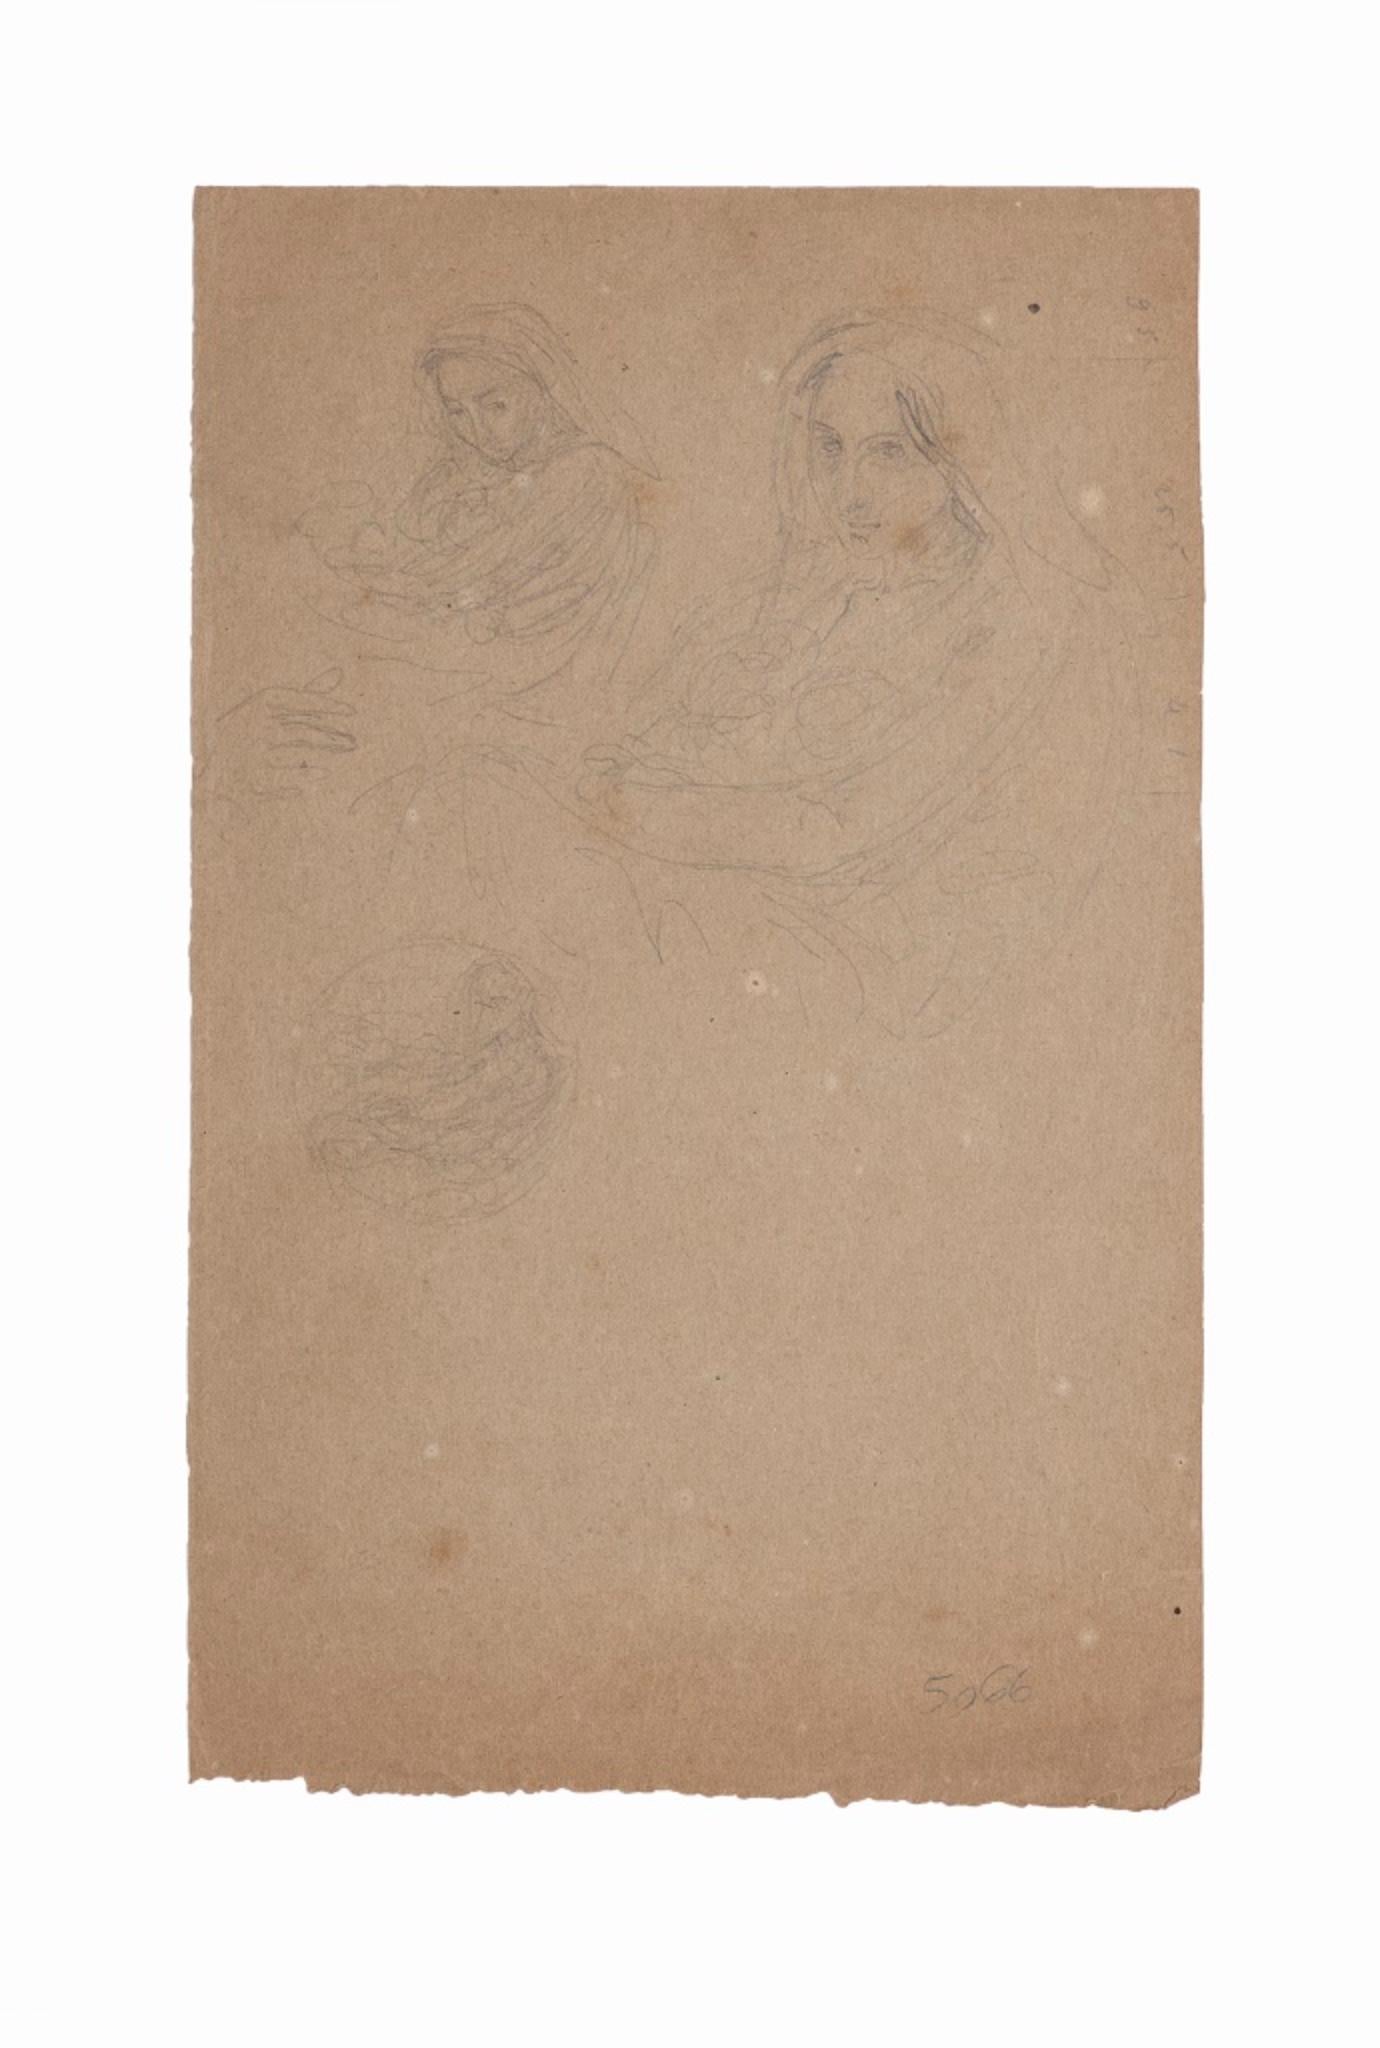 Nude from the Back is an original pencil drawing realized by Charles Lucien Moulin in the early 20th Century.

Good conditions on a brown paper, except for worn paper on the lower margin.

A little stamp of the artist on the lower left corner, other